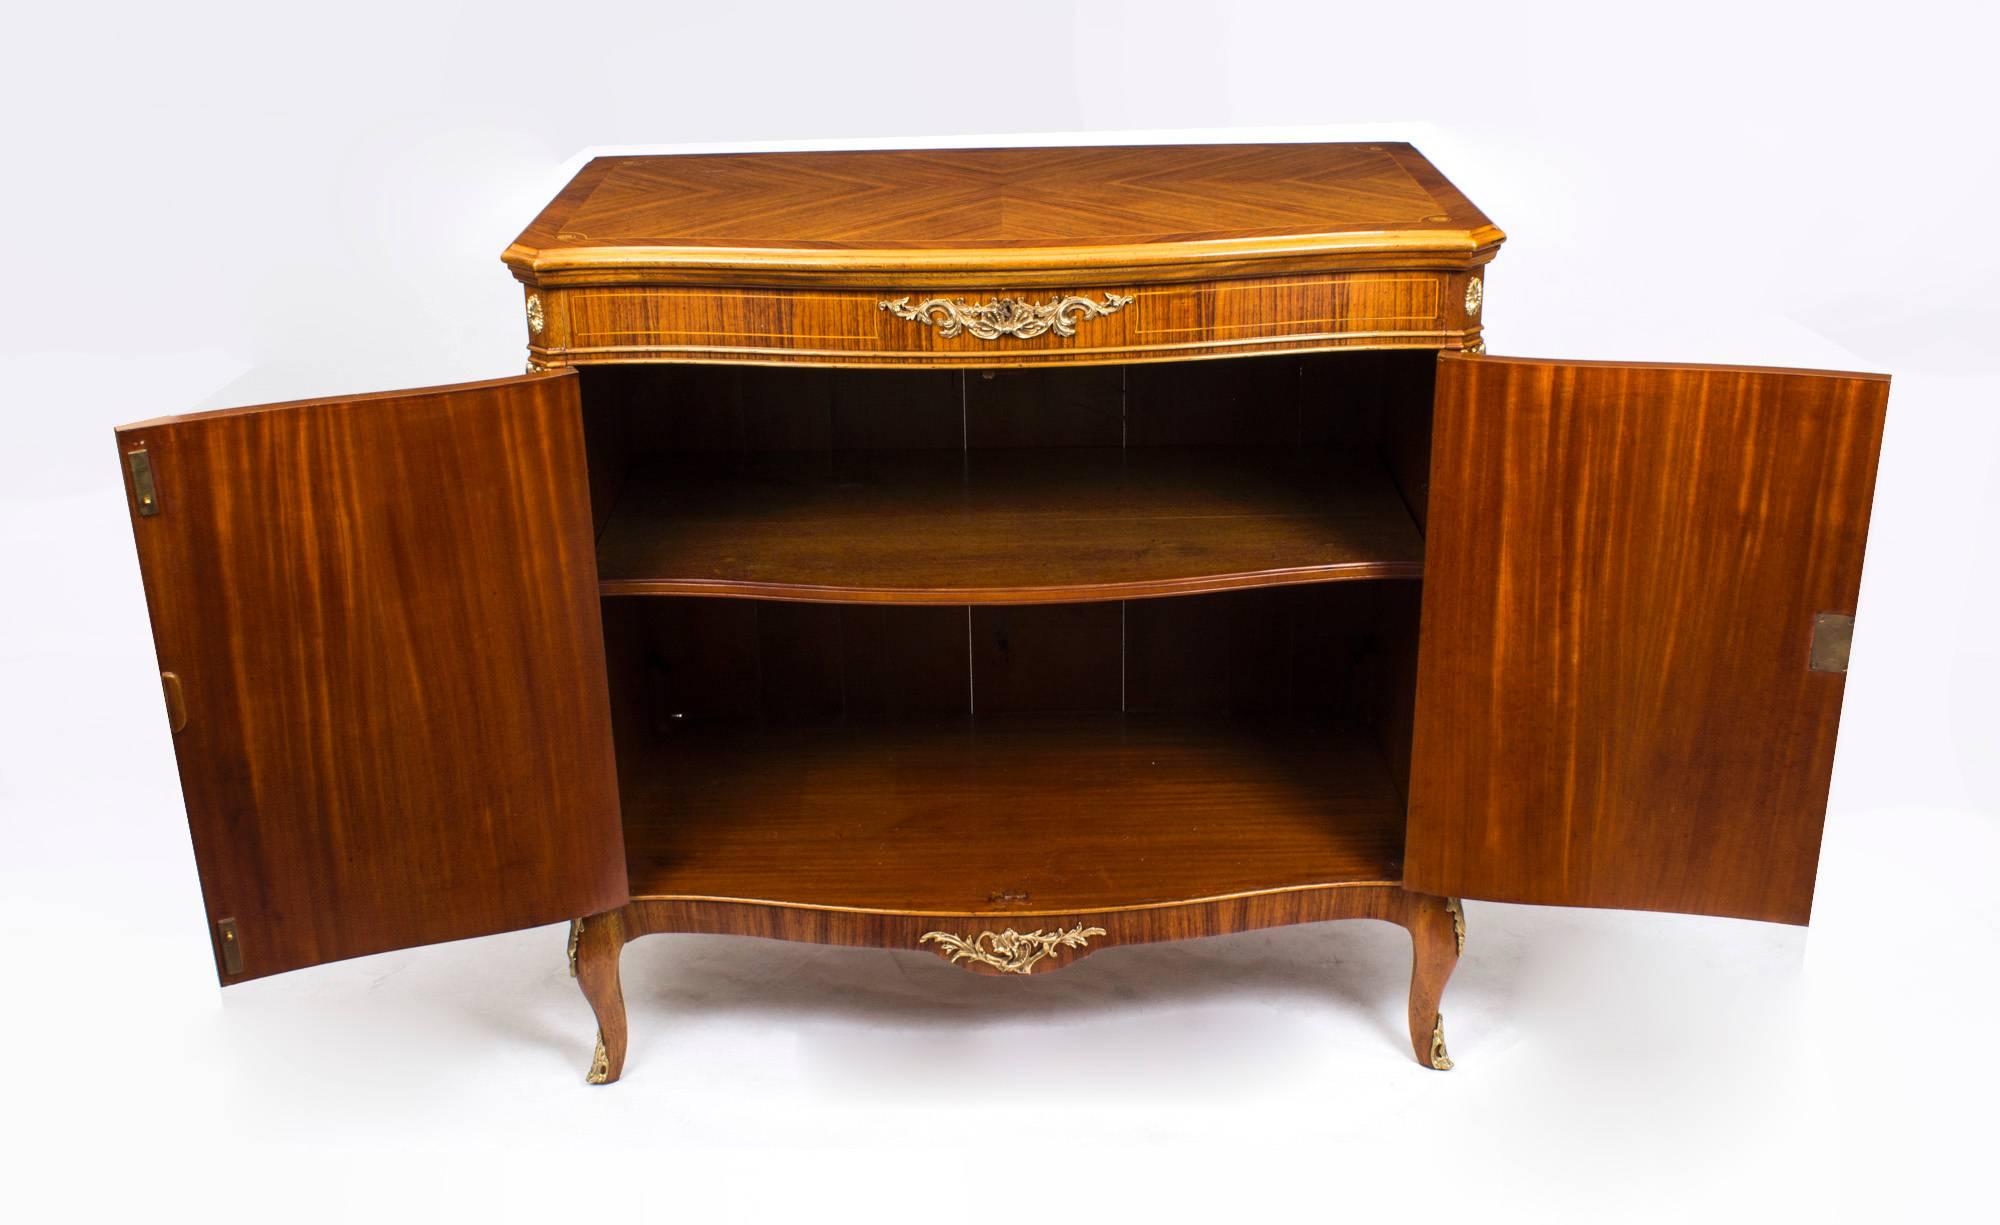 This is a fantastic vintage burr walnut side cabinet with fabulous ormolu mounts, exquisite floral marquetry decoration, circa 1950 in date and by the renowned makers of bespoke furniture, Epstein Bros.

The doors open to reveal a cupboard with a